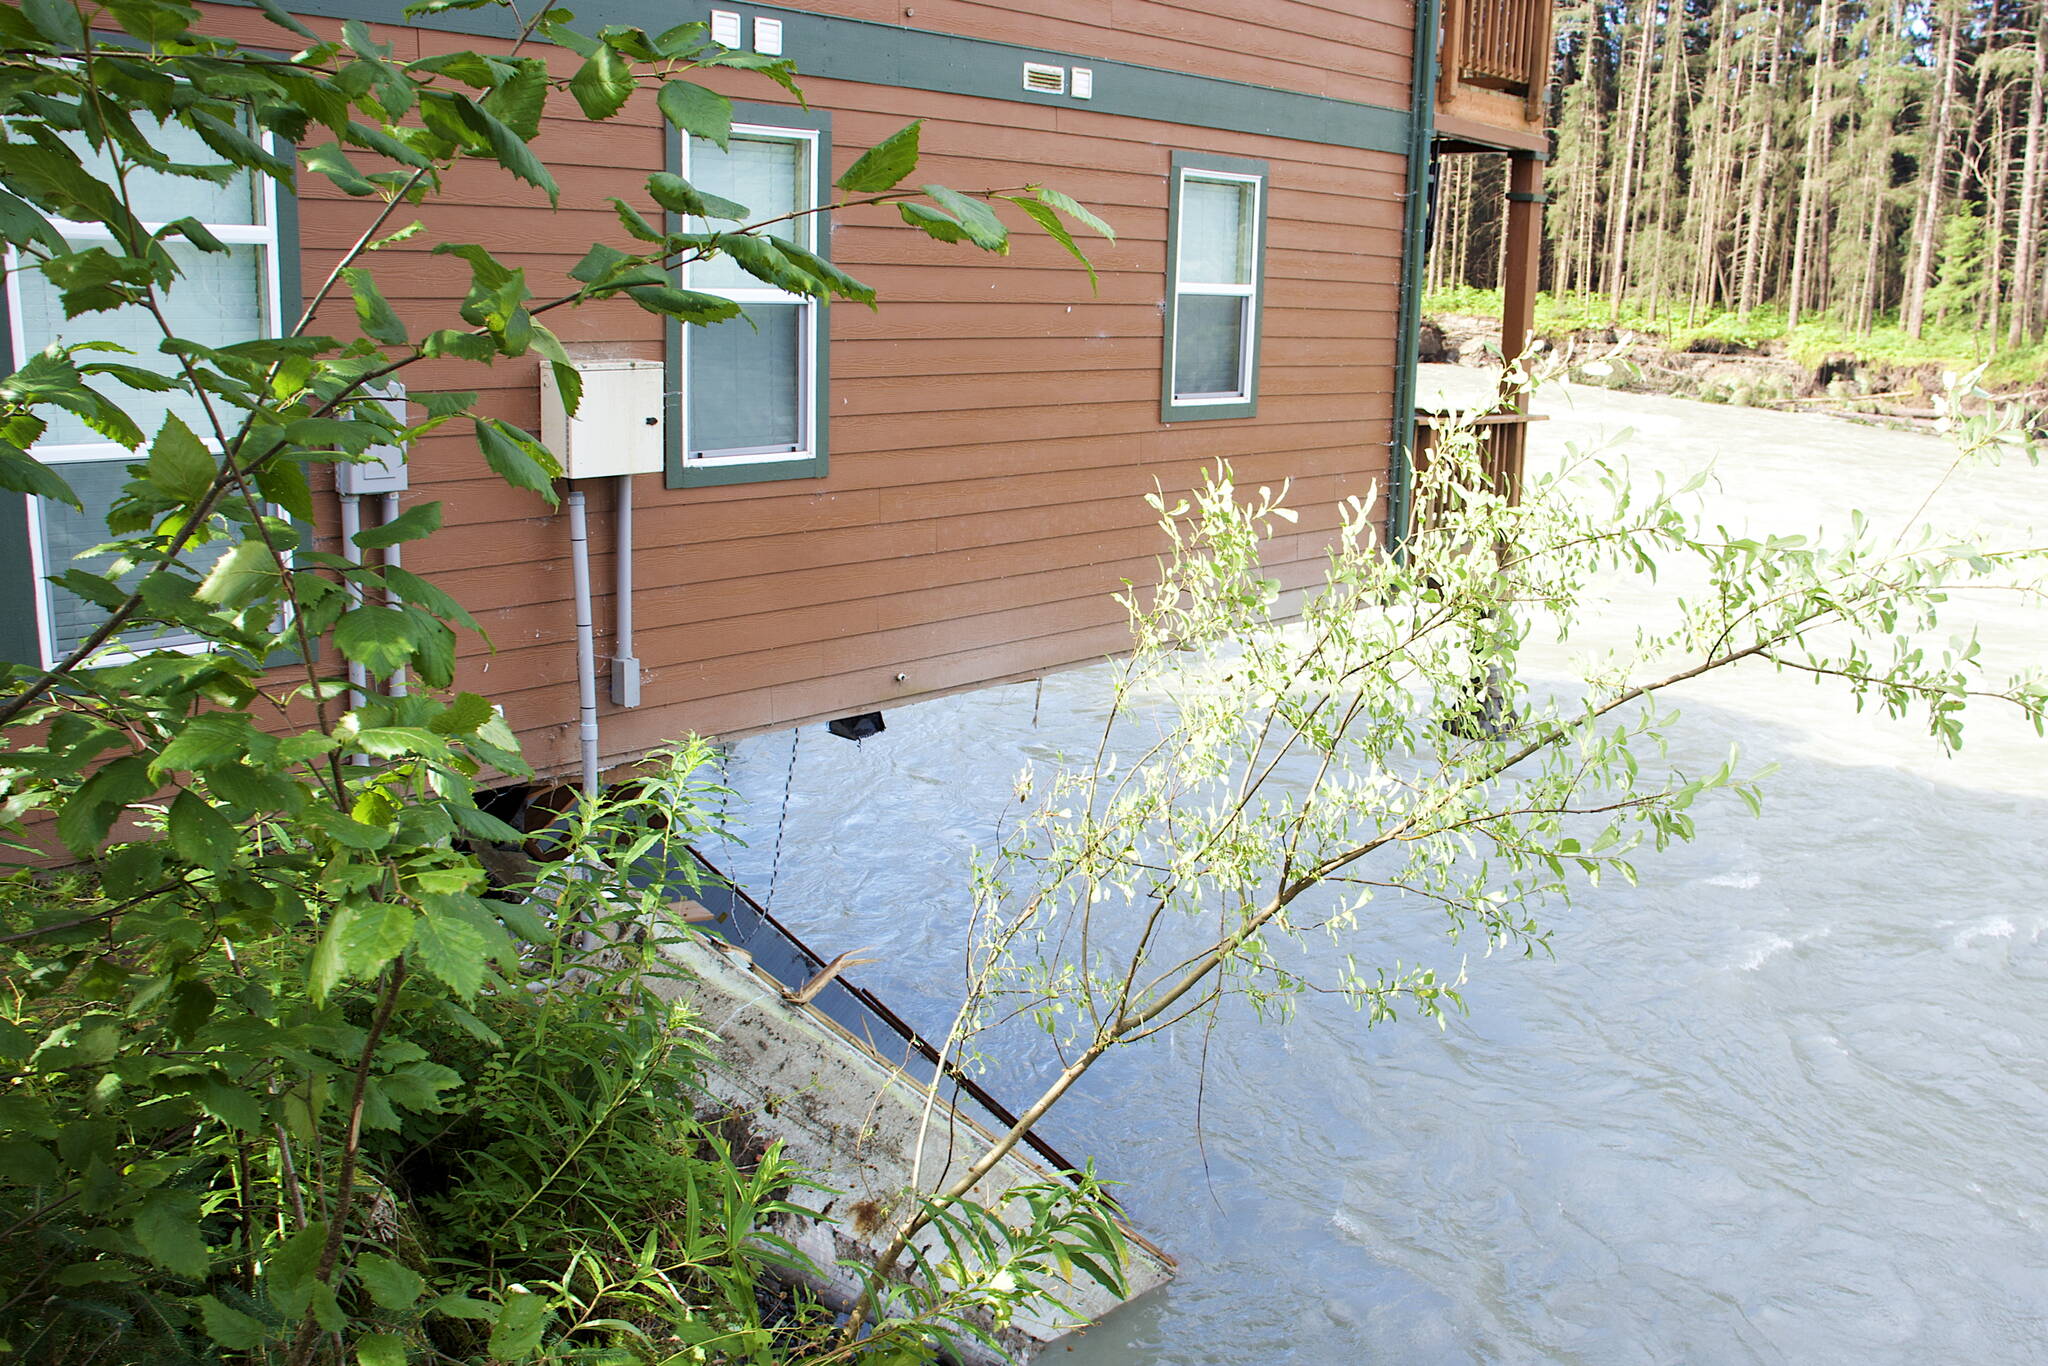 A corner of a condominium complex hangs over the edge of an eroded bank along the Mendenhall River on Sunday morning. Residents of two complexes on the property were forced to evacuate their homes Saturday and were continuing to remove belongings Sunday as doubts were expressed by some about whether the structures can be saved. (Mark Sabbatini / Juneau Empire)